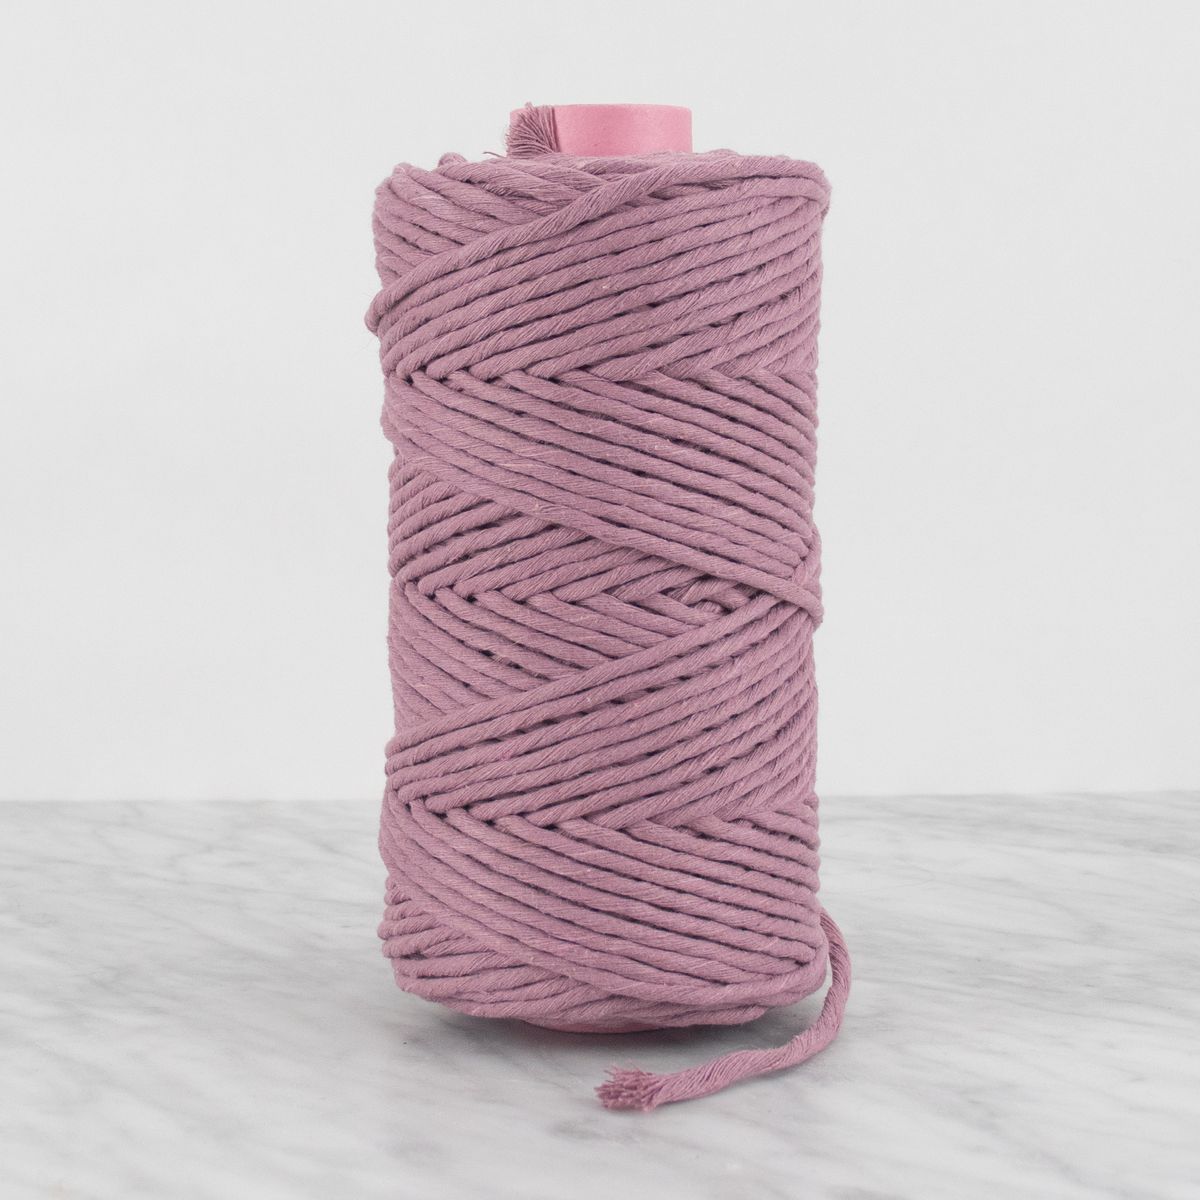 5 mm Recycled Cotton String 0.5 kg - Blush